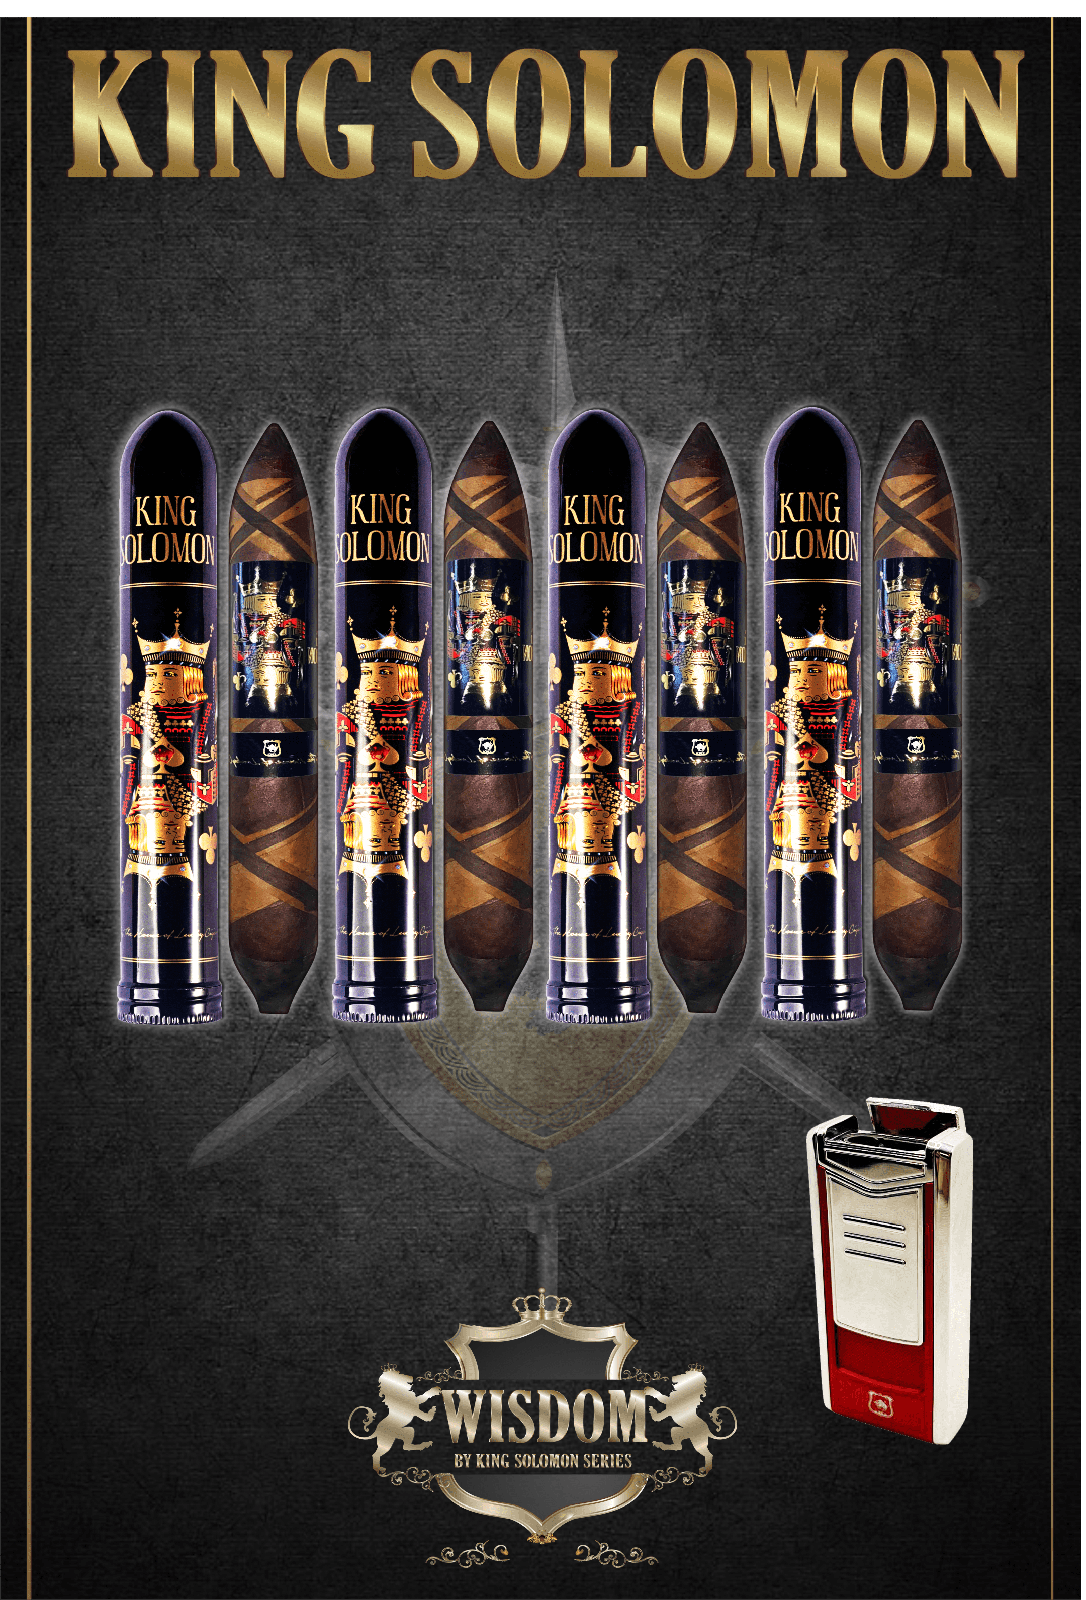 From The King Solomon Series: 4 Solomon 7x60 Cigars with Torch Lighter Set